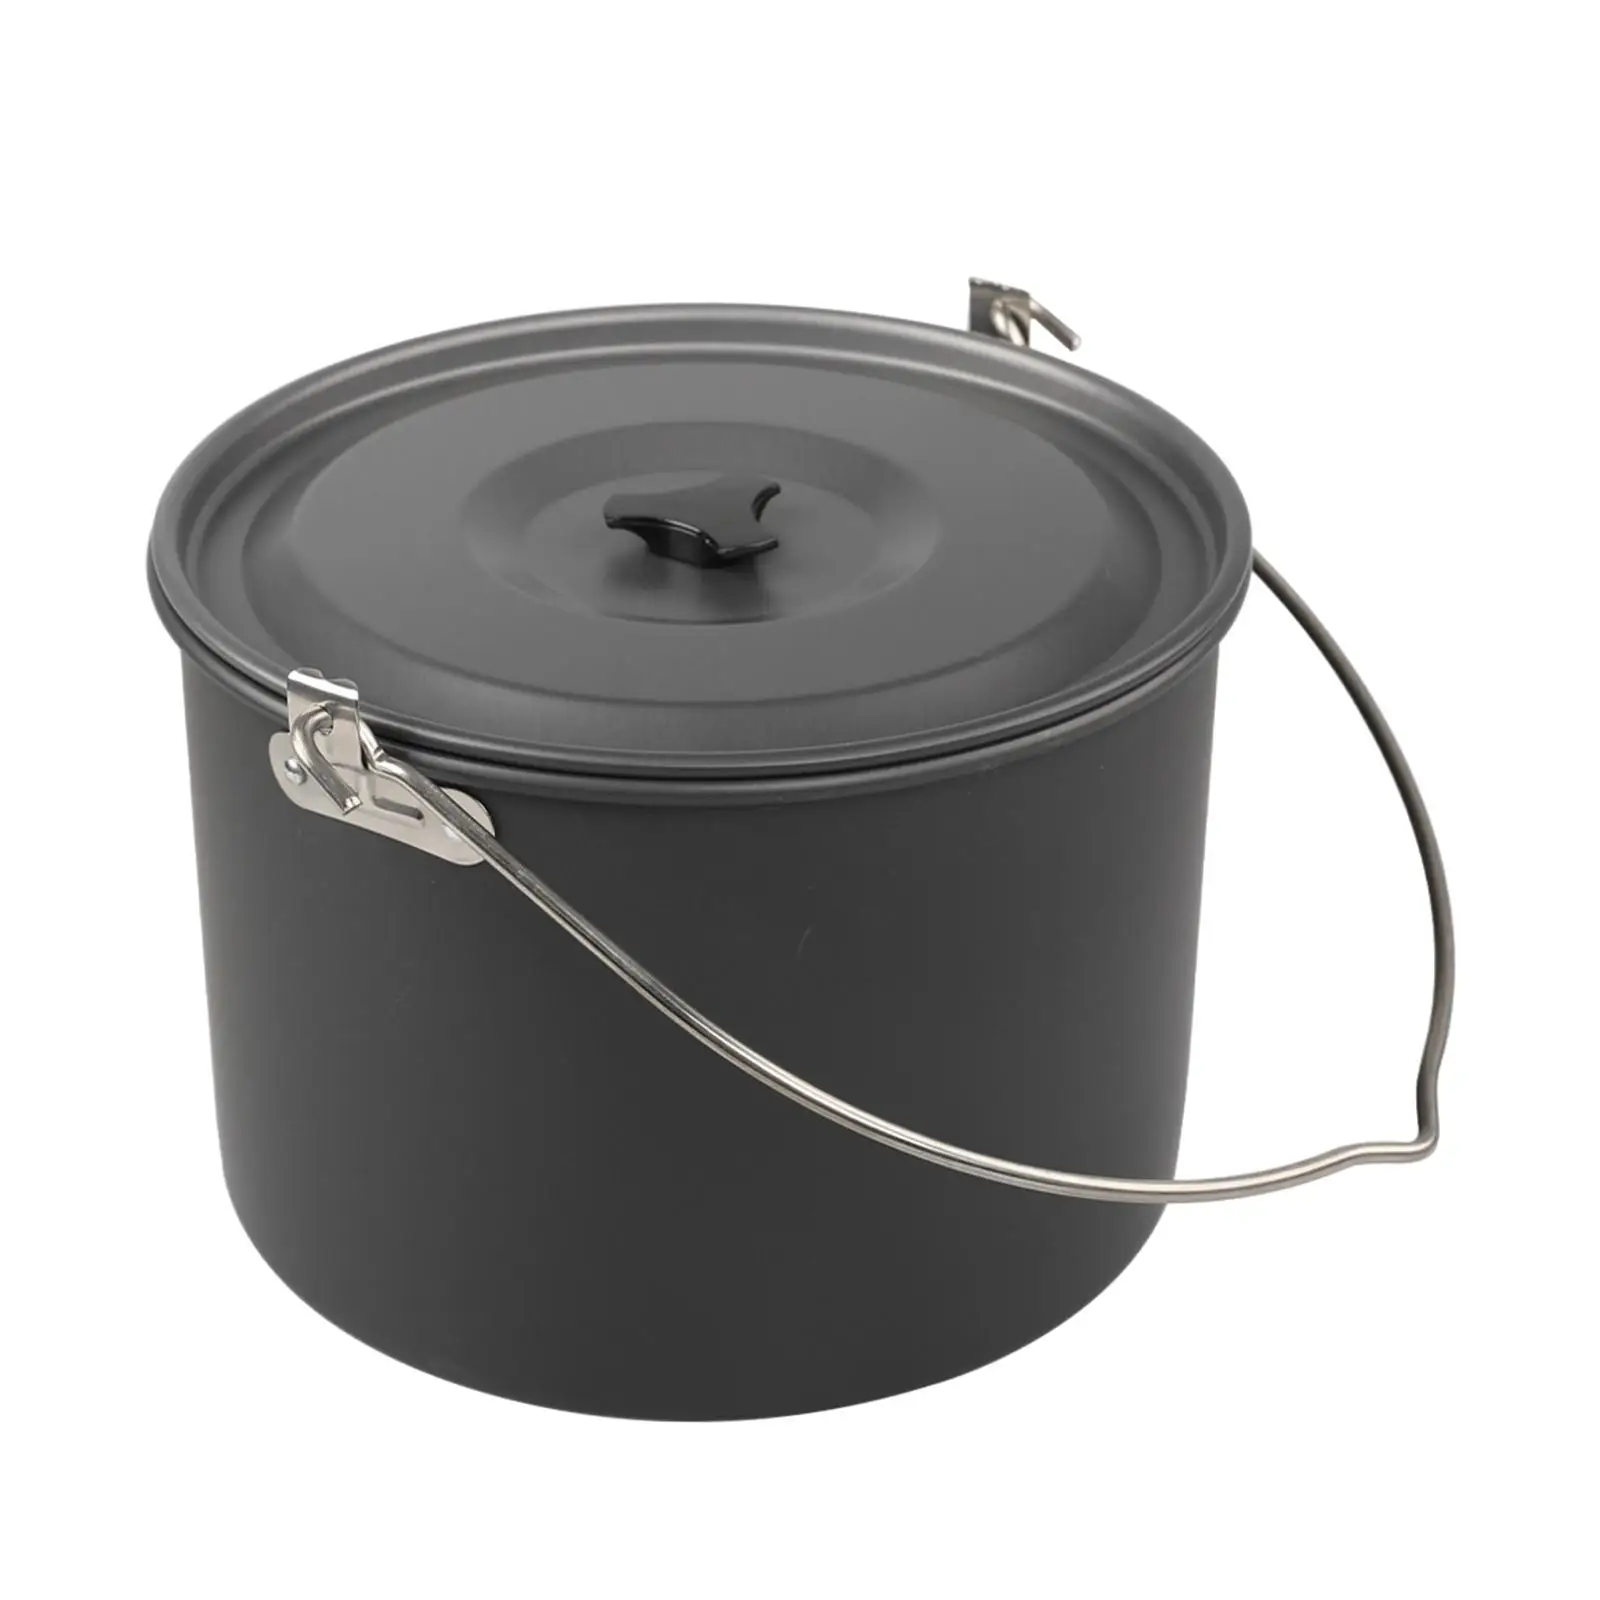 Cooking Pot High Capacity Lightweight Nonstick Camping Cookware Outdoor Pot Pan for Hiking Fishing Outdoor Survival Dinner